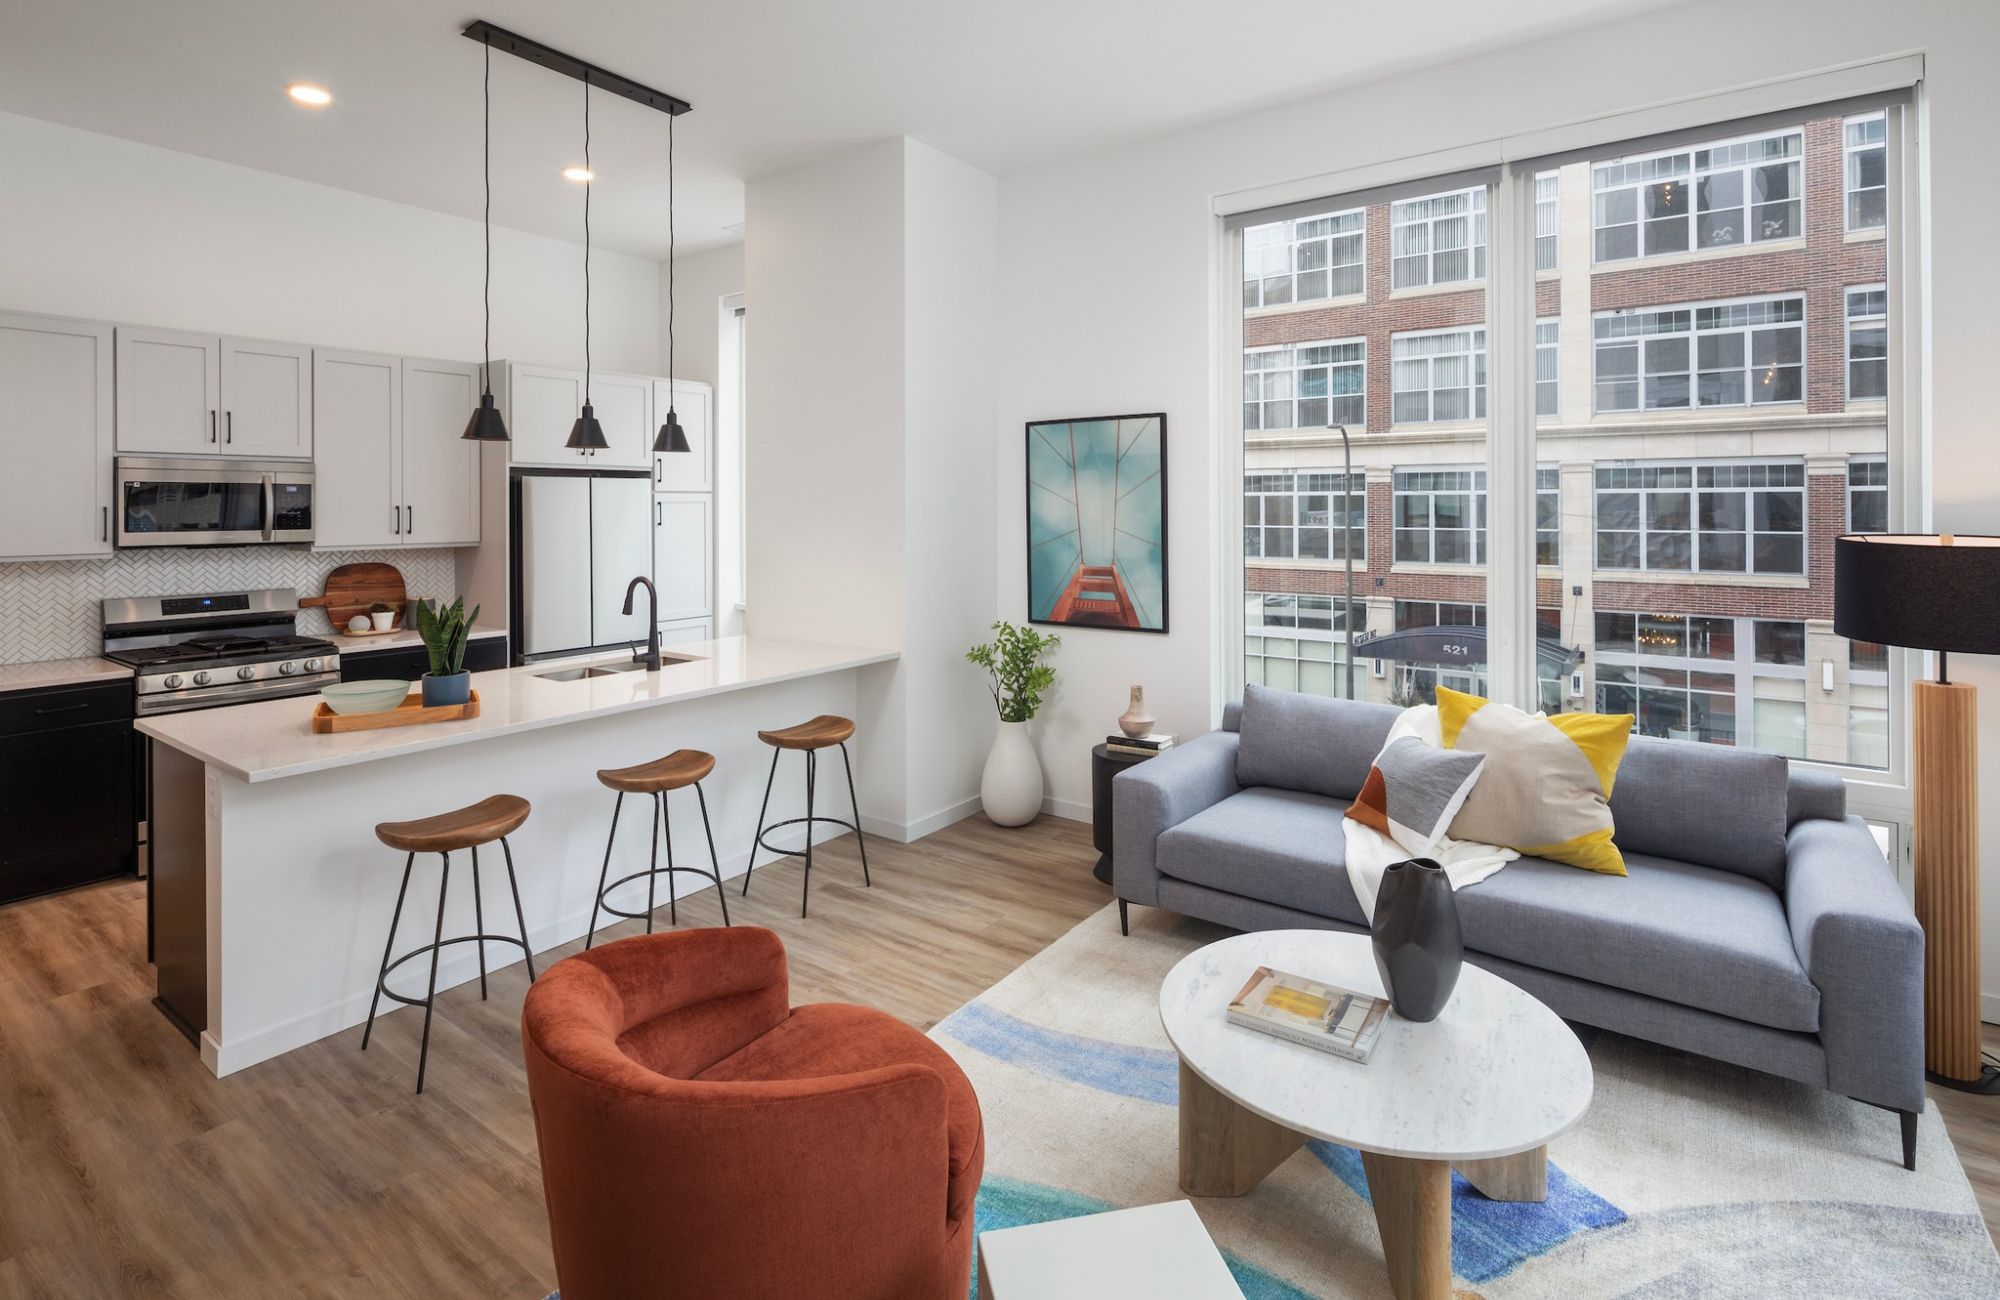 Moment Minneapolis apartments open floor plan layout with colorful furniture and lots of natural light